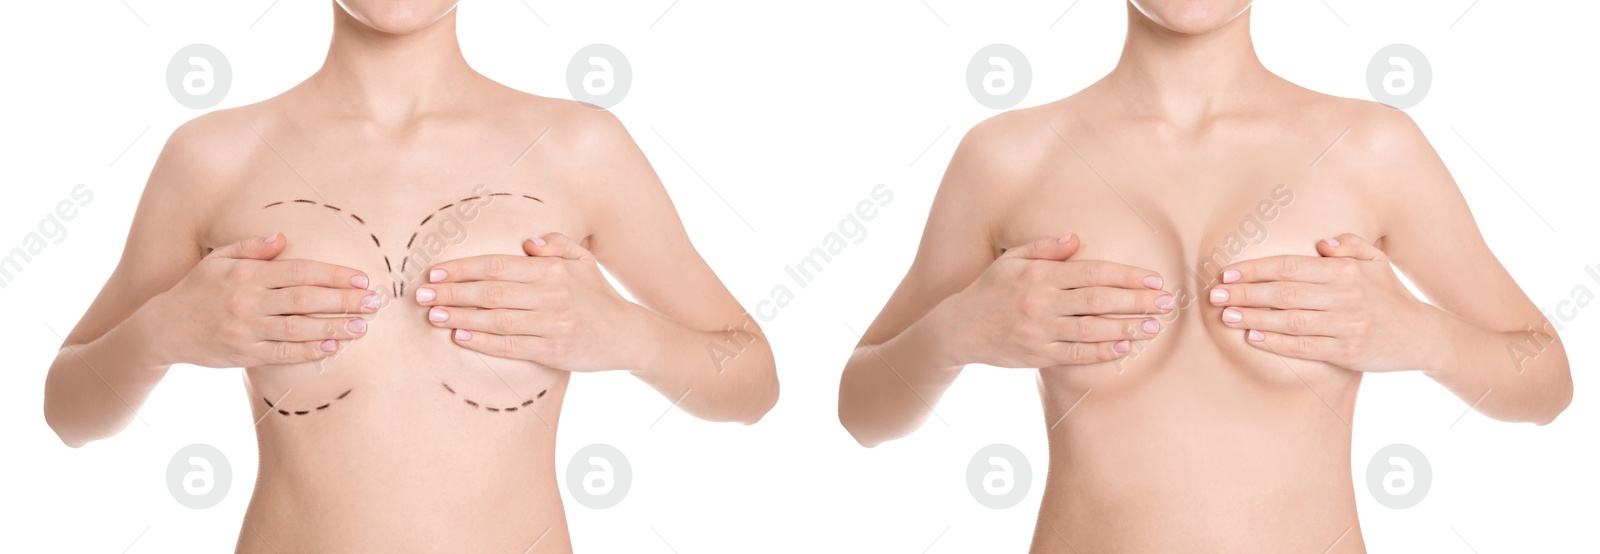 Image of Breast augmentation with silicone implants. Collage with photos of woman before and after plastic surgery on white background, closeup